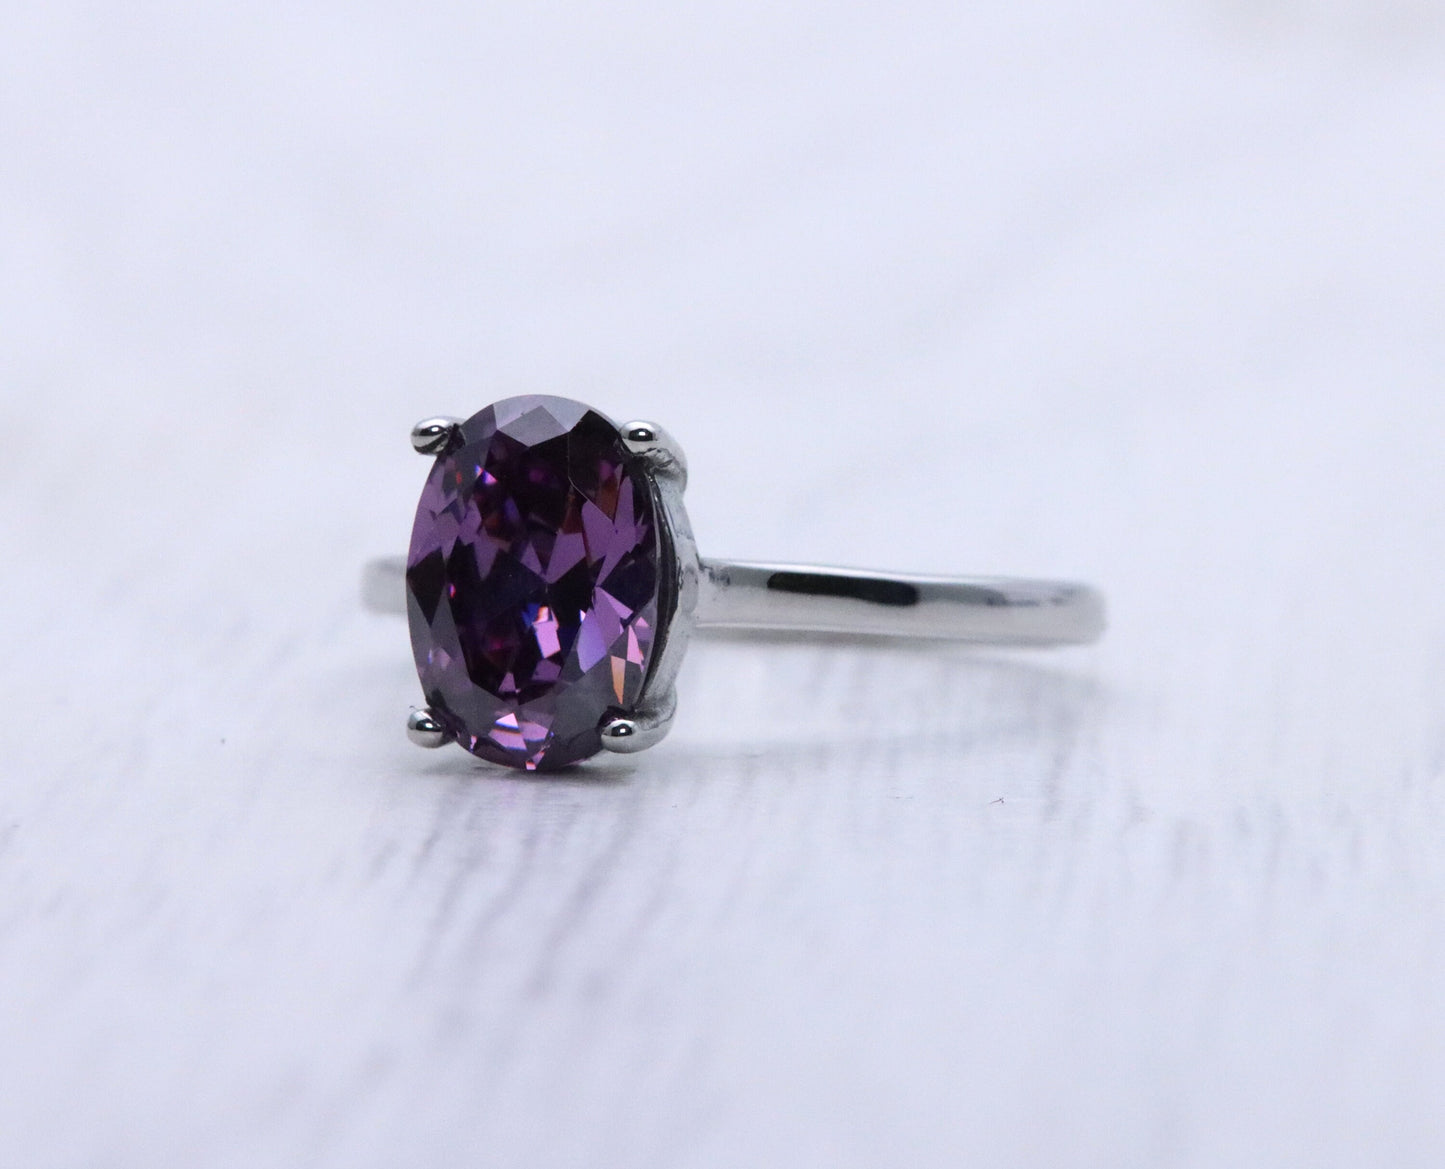 0.7 to 1.7ct oval Cut amethyst Solitaire cathedral in Titanium or White Gold